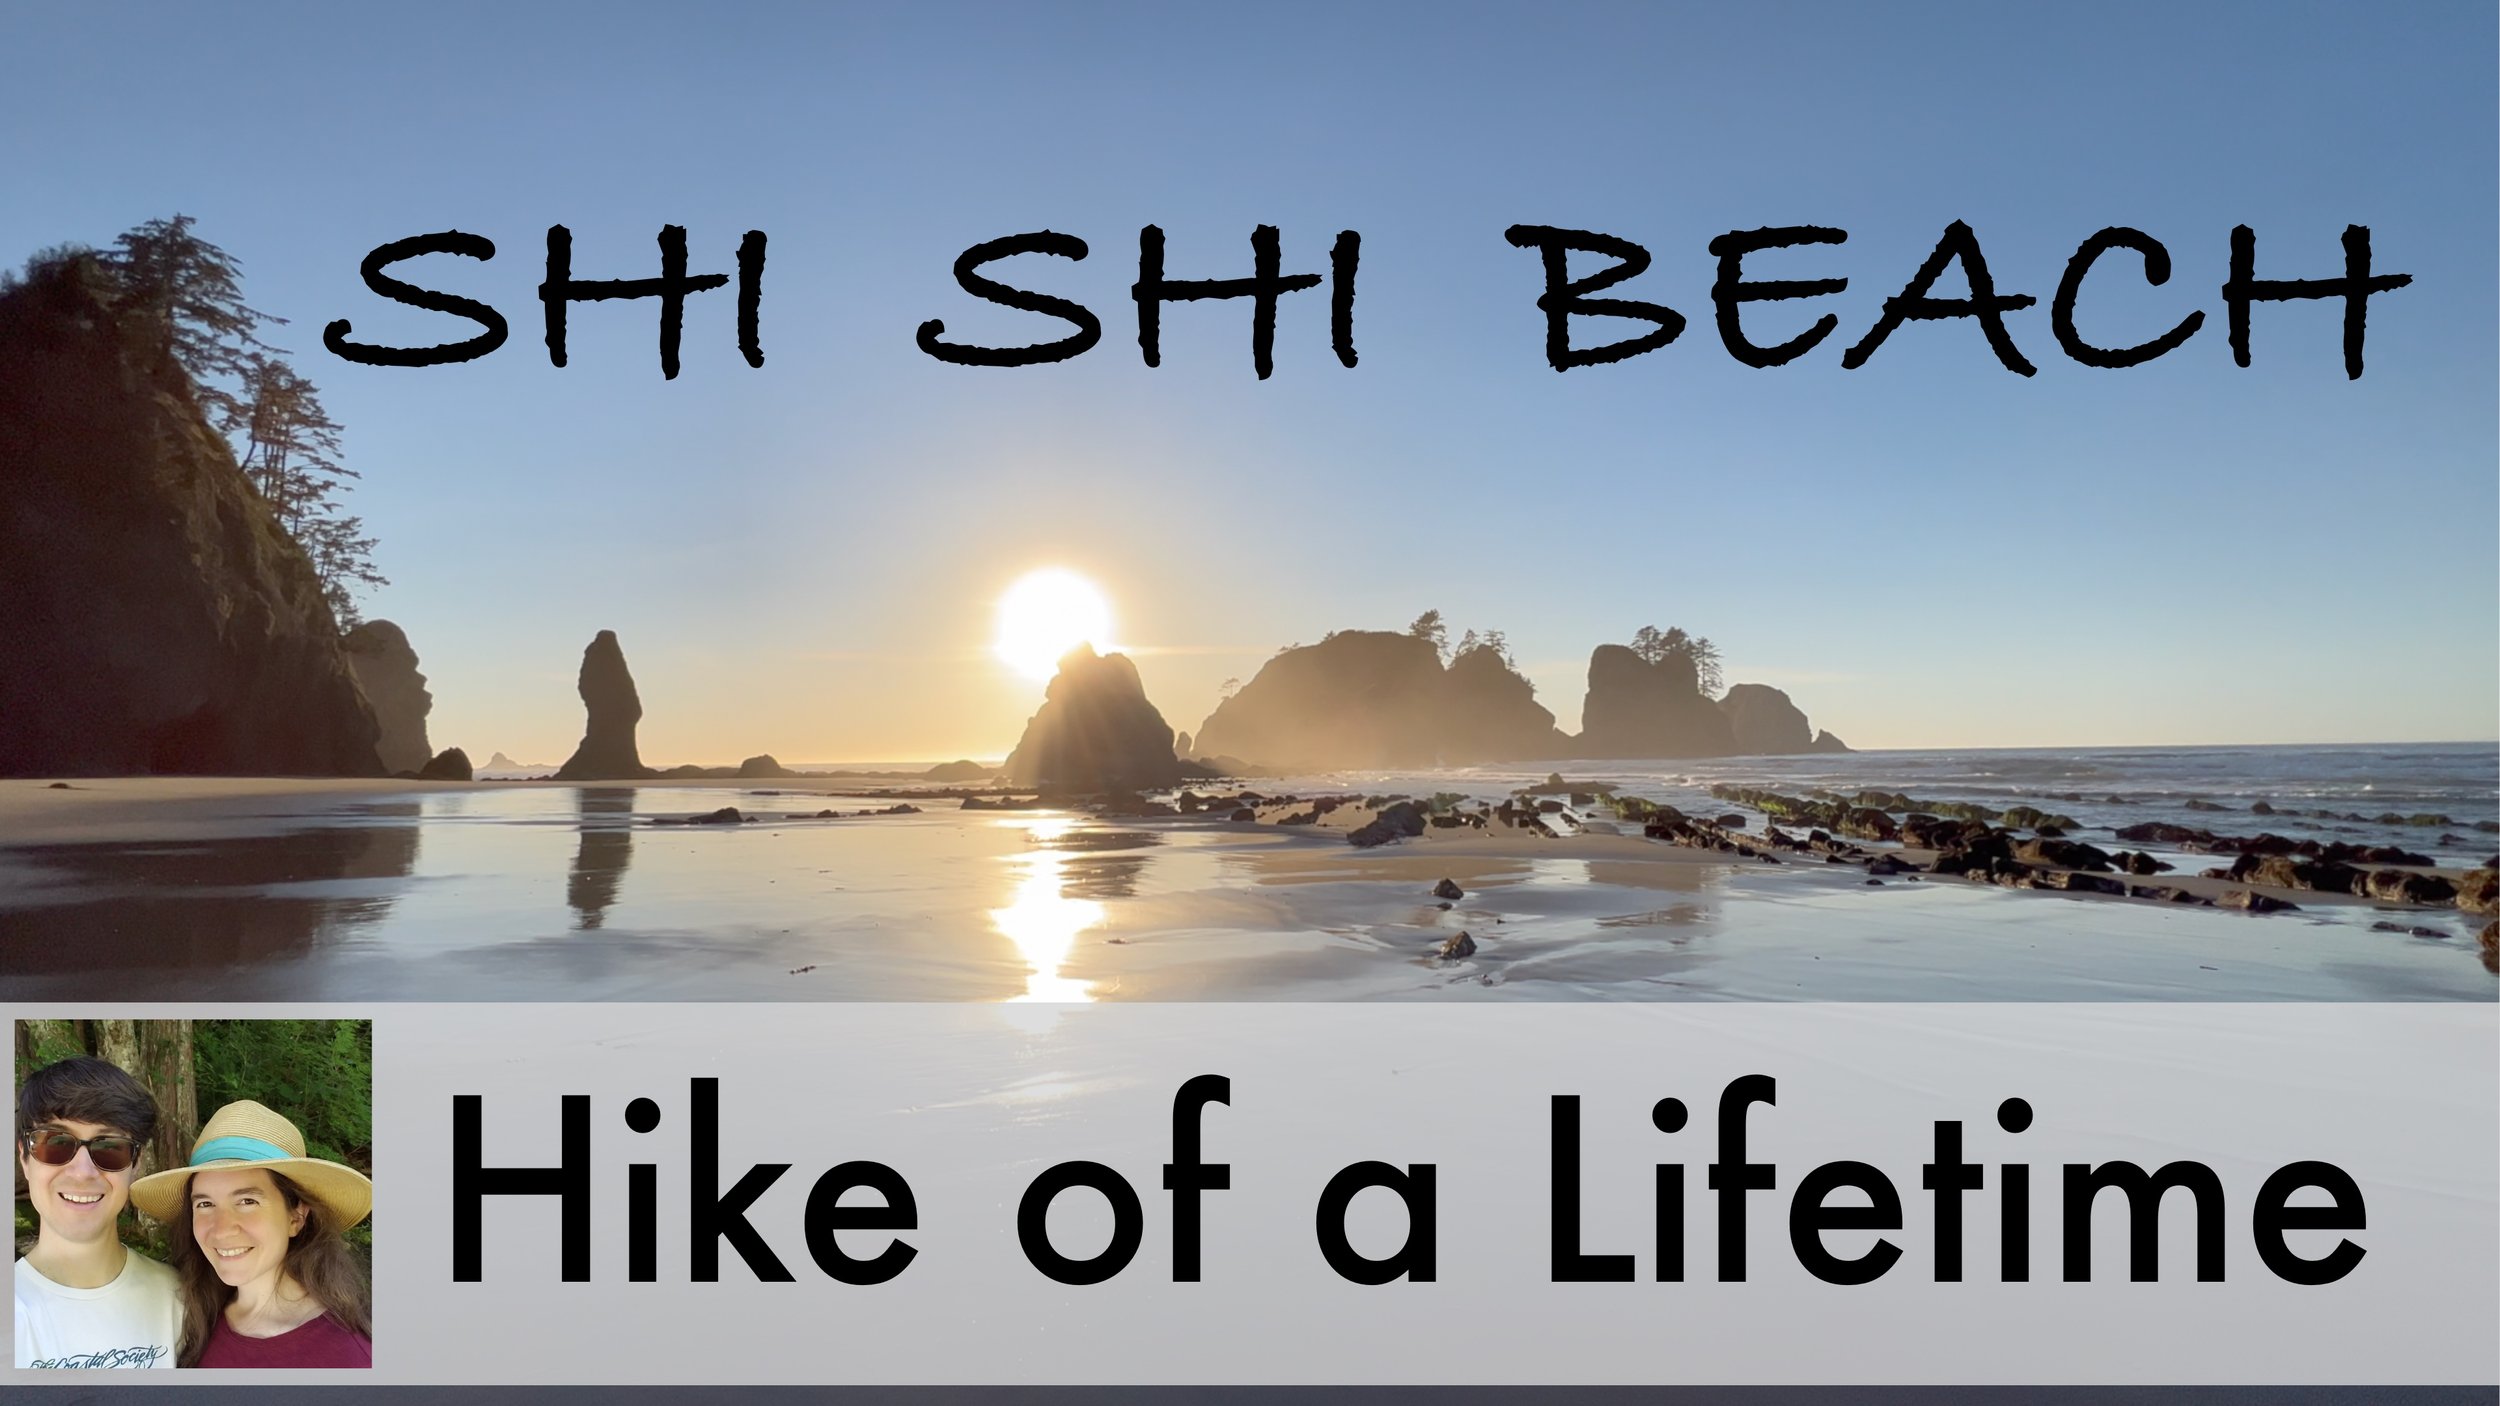 Hike of a Lifetime: Point of Arches and Shi Shi Beach Trail